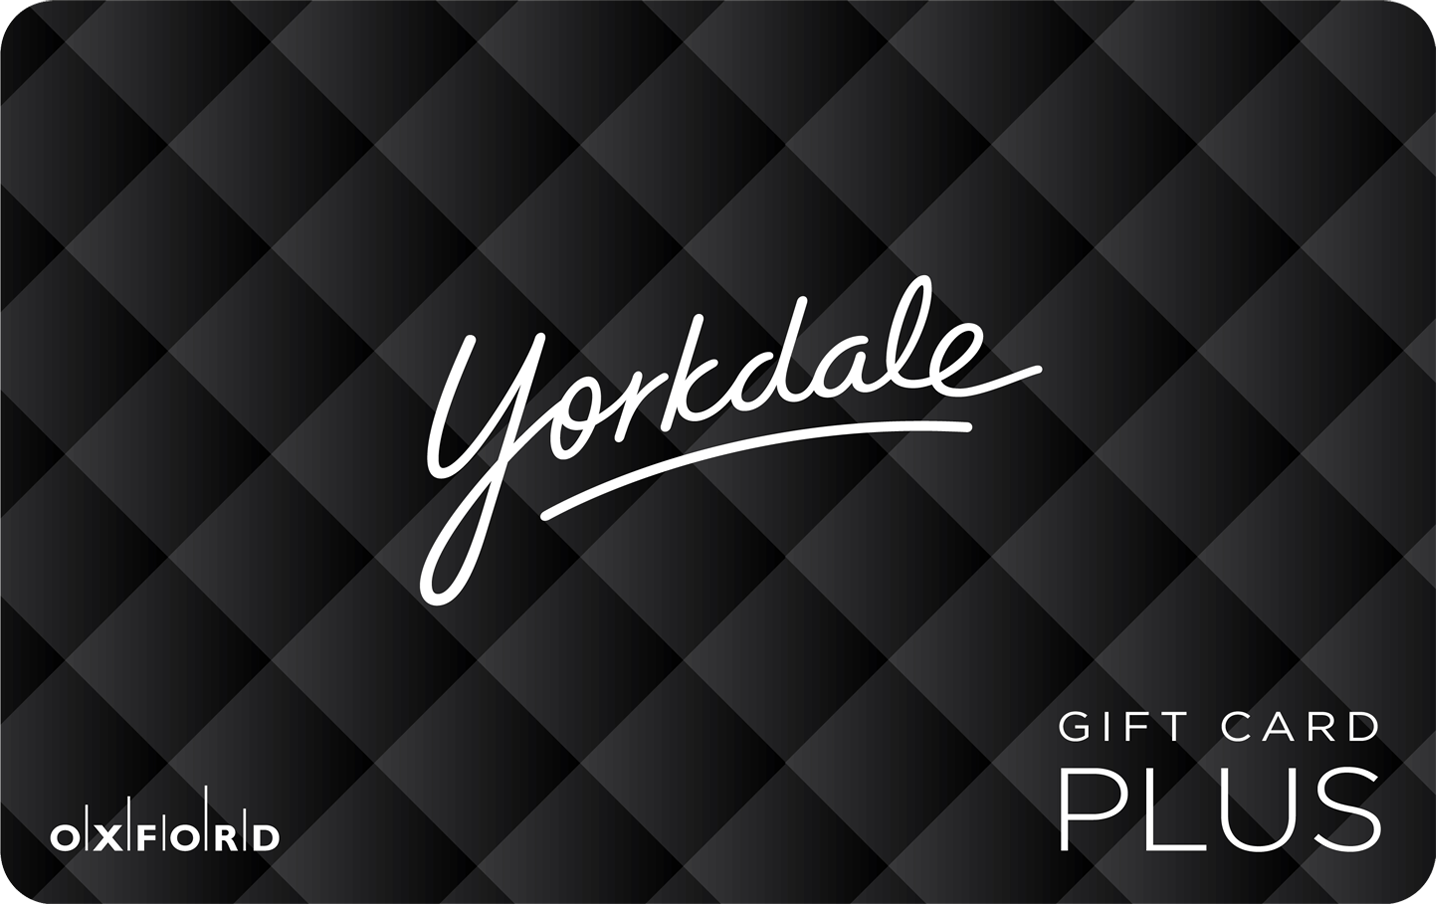 image of a black yorkdale gift card